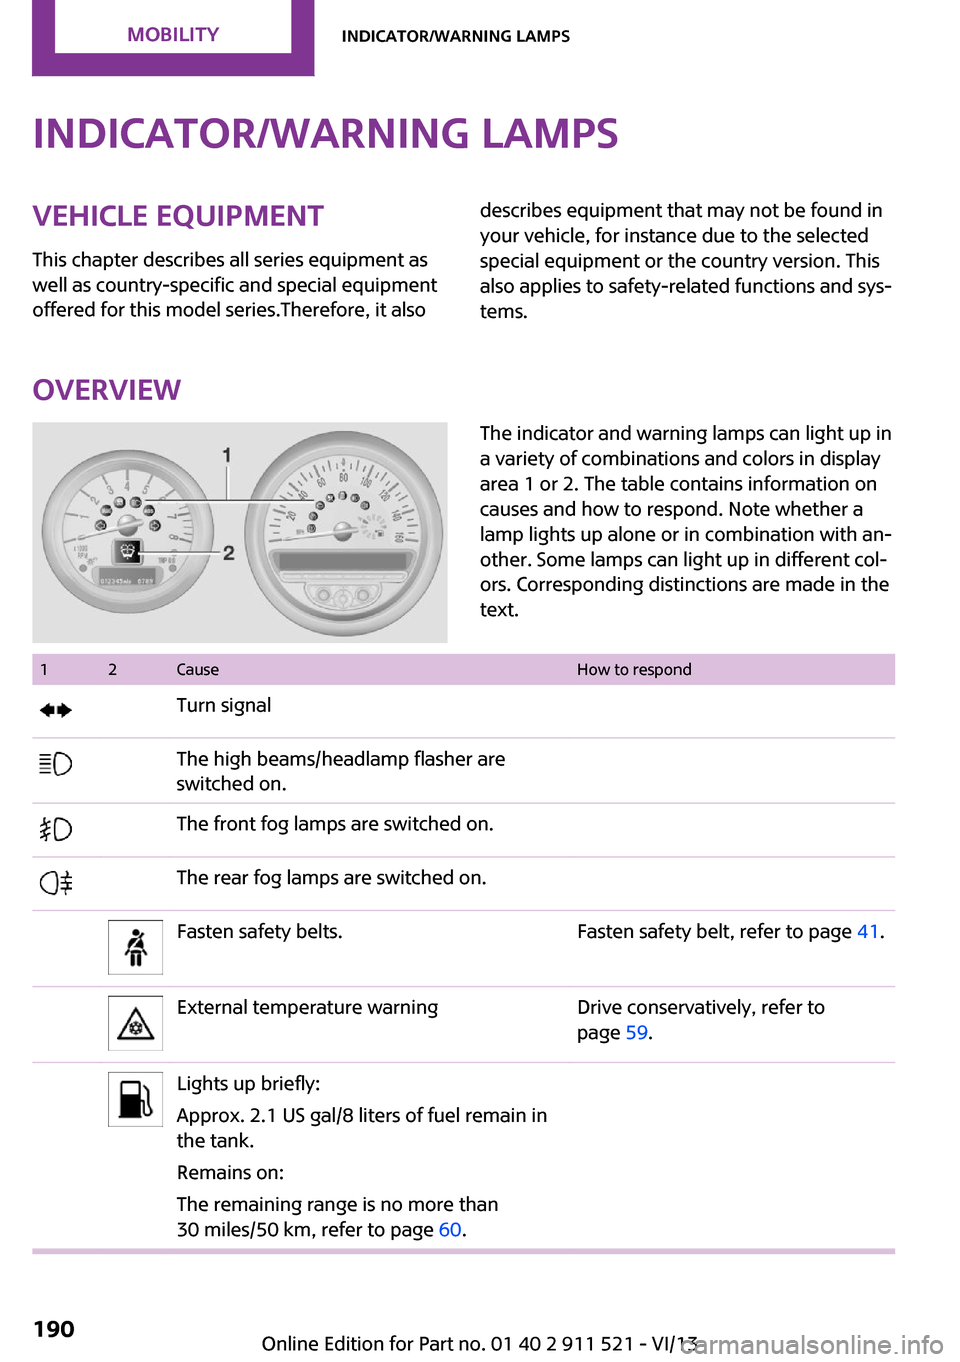 MINI Paceman 2014  Owners Manual Indicator/warning lampsVehicle equipment
This chapter describes all series equipment as
well as country-specific and special equipment
offered for this model series.Therefore, it alsodescribes equipme